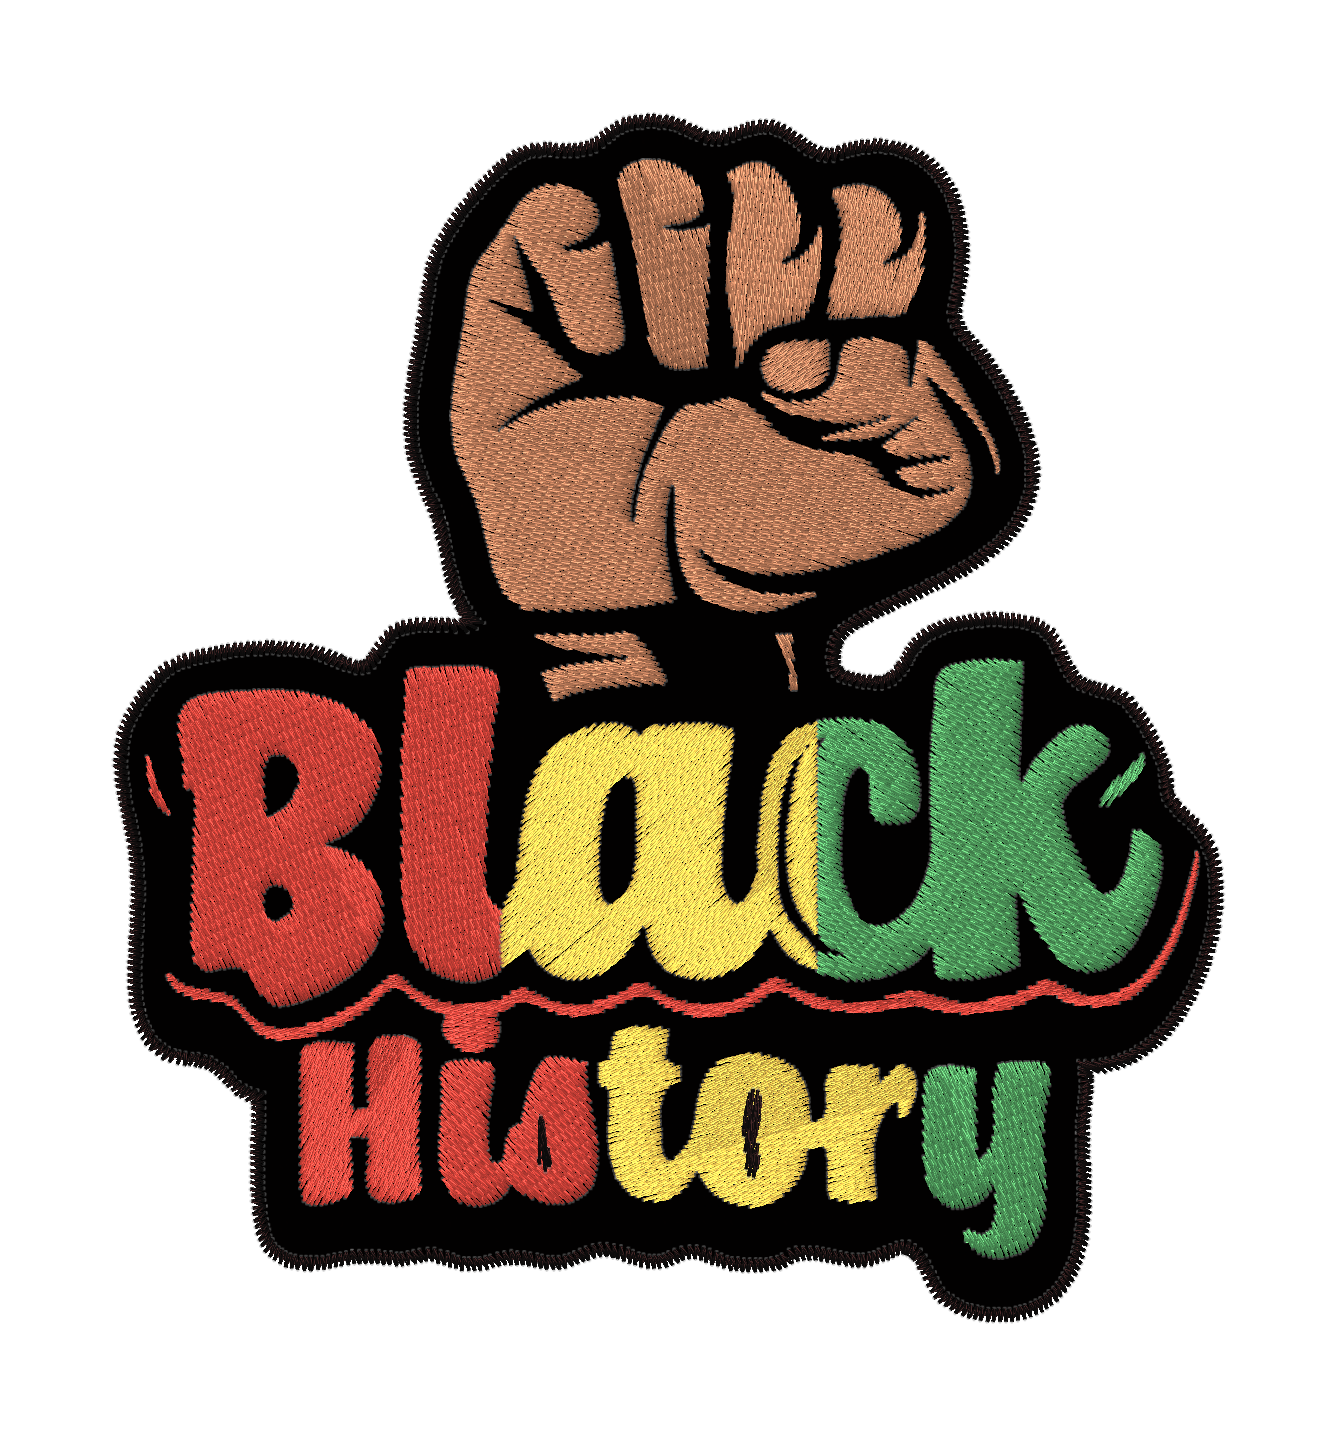 Black History Fist Embroidered Iron-on Patch